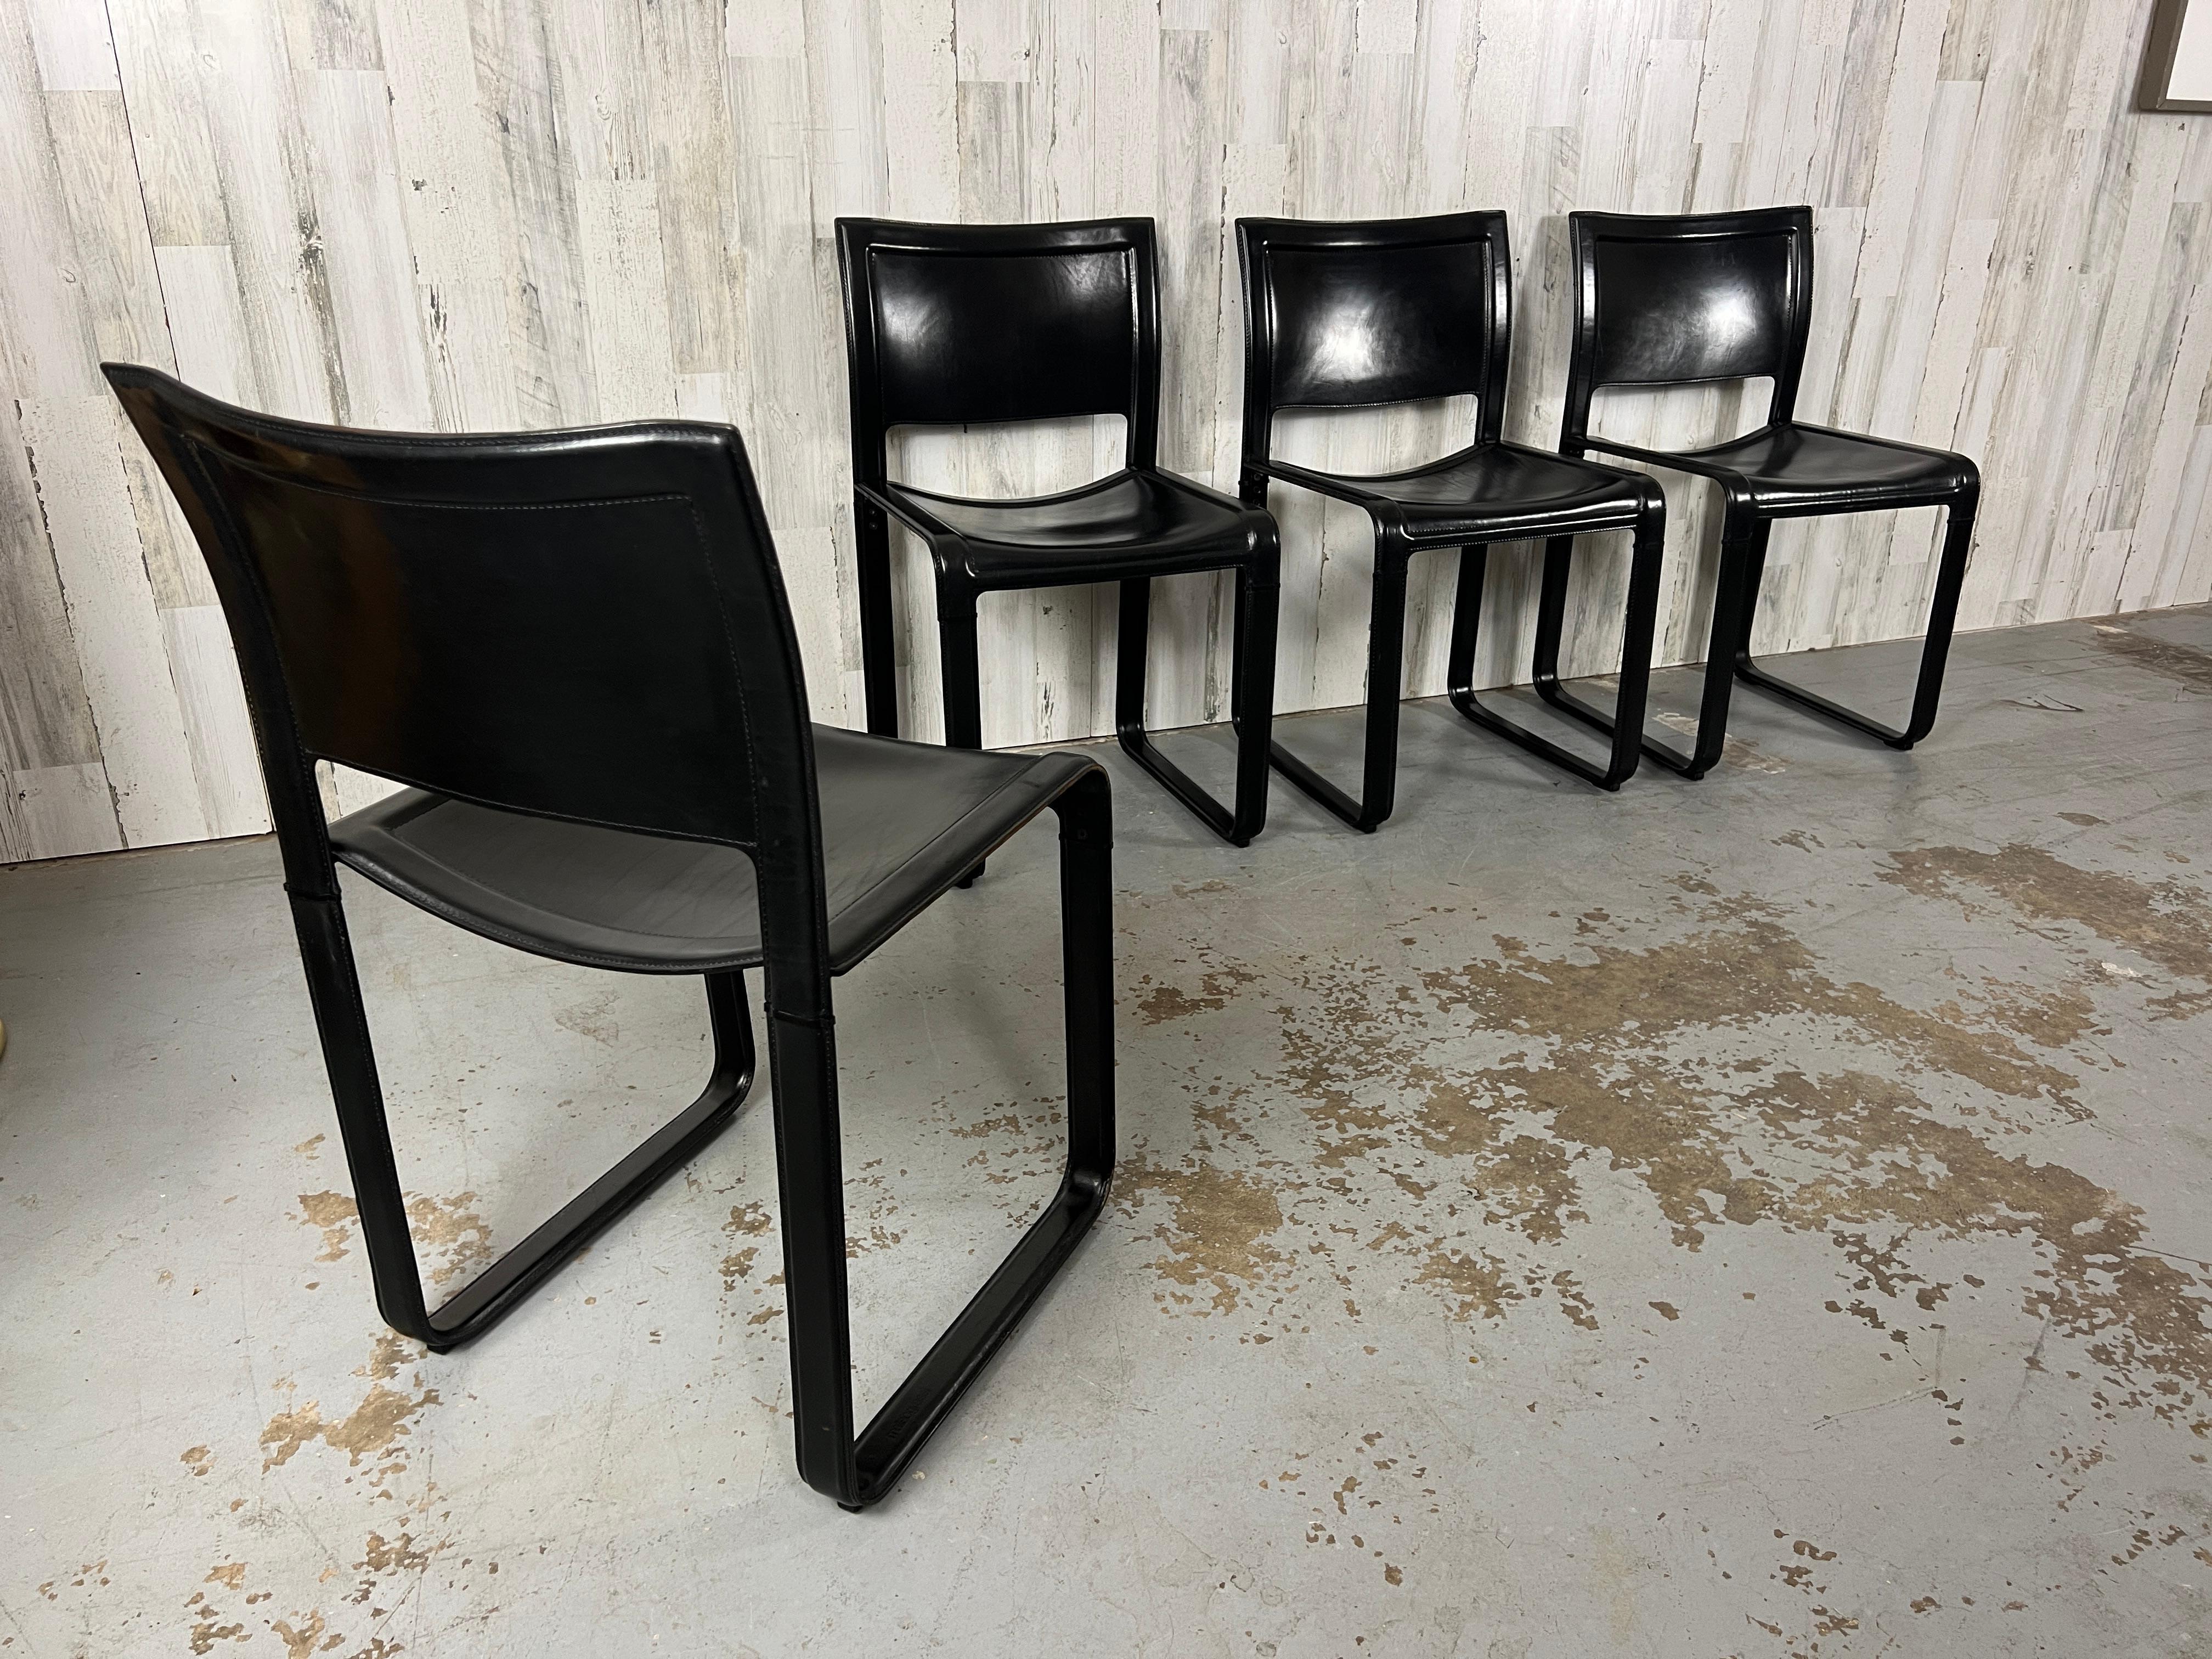 Set of four leather wrapped and stitched dining chairs by Matteo Grassi
Matteo Grassi is an Italian furniture designer and manufacturer known for his exceptional craftsmanship and innovative designs. 